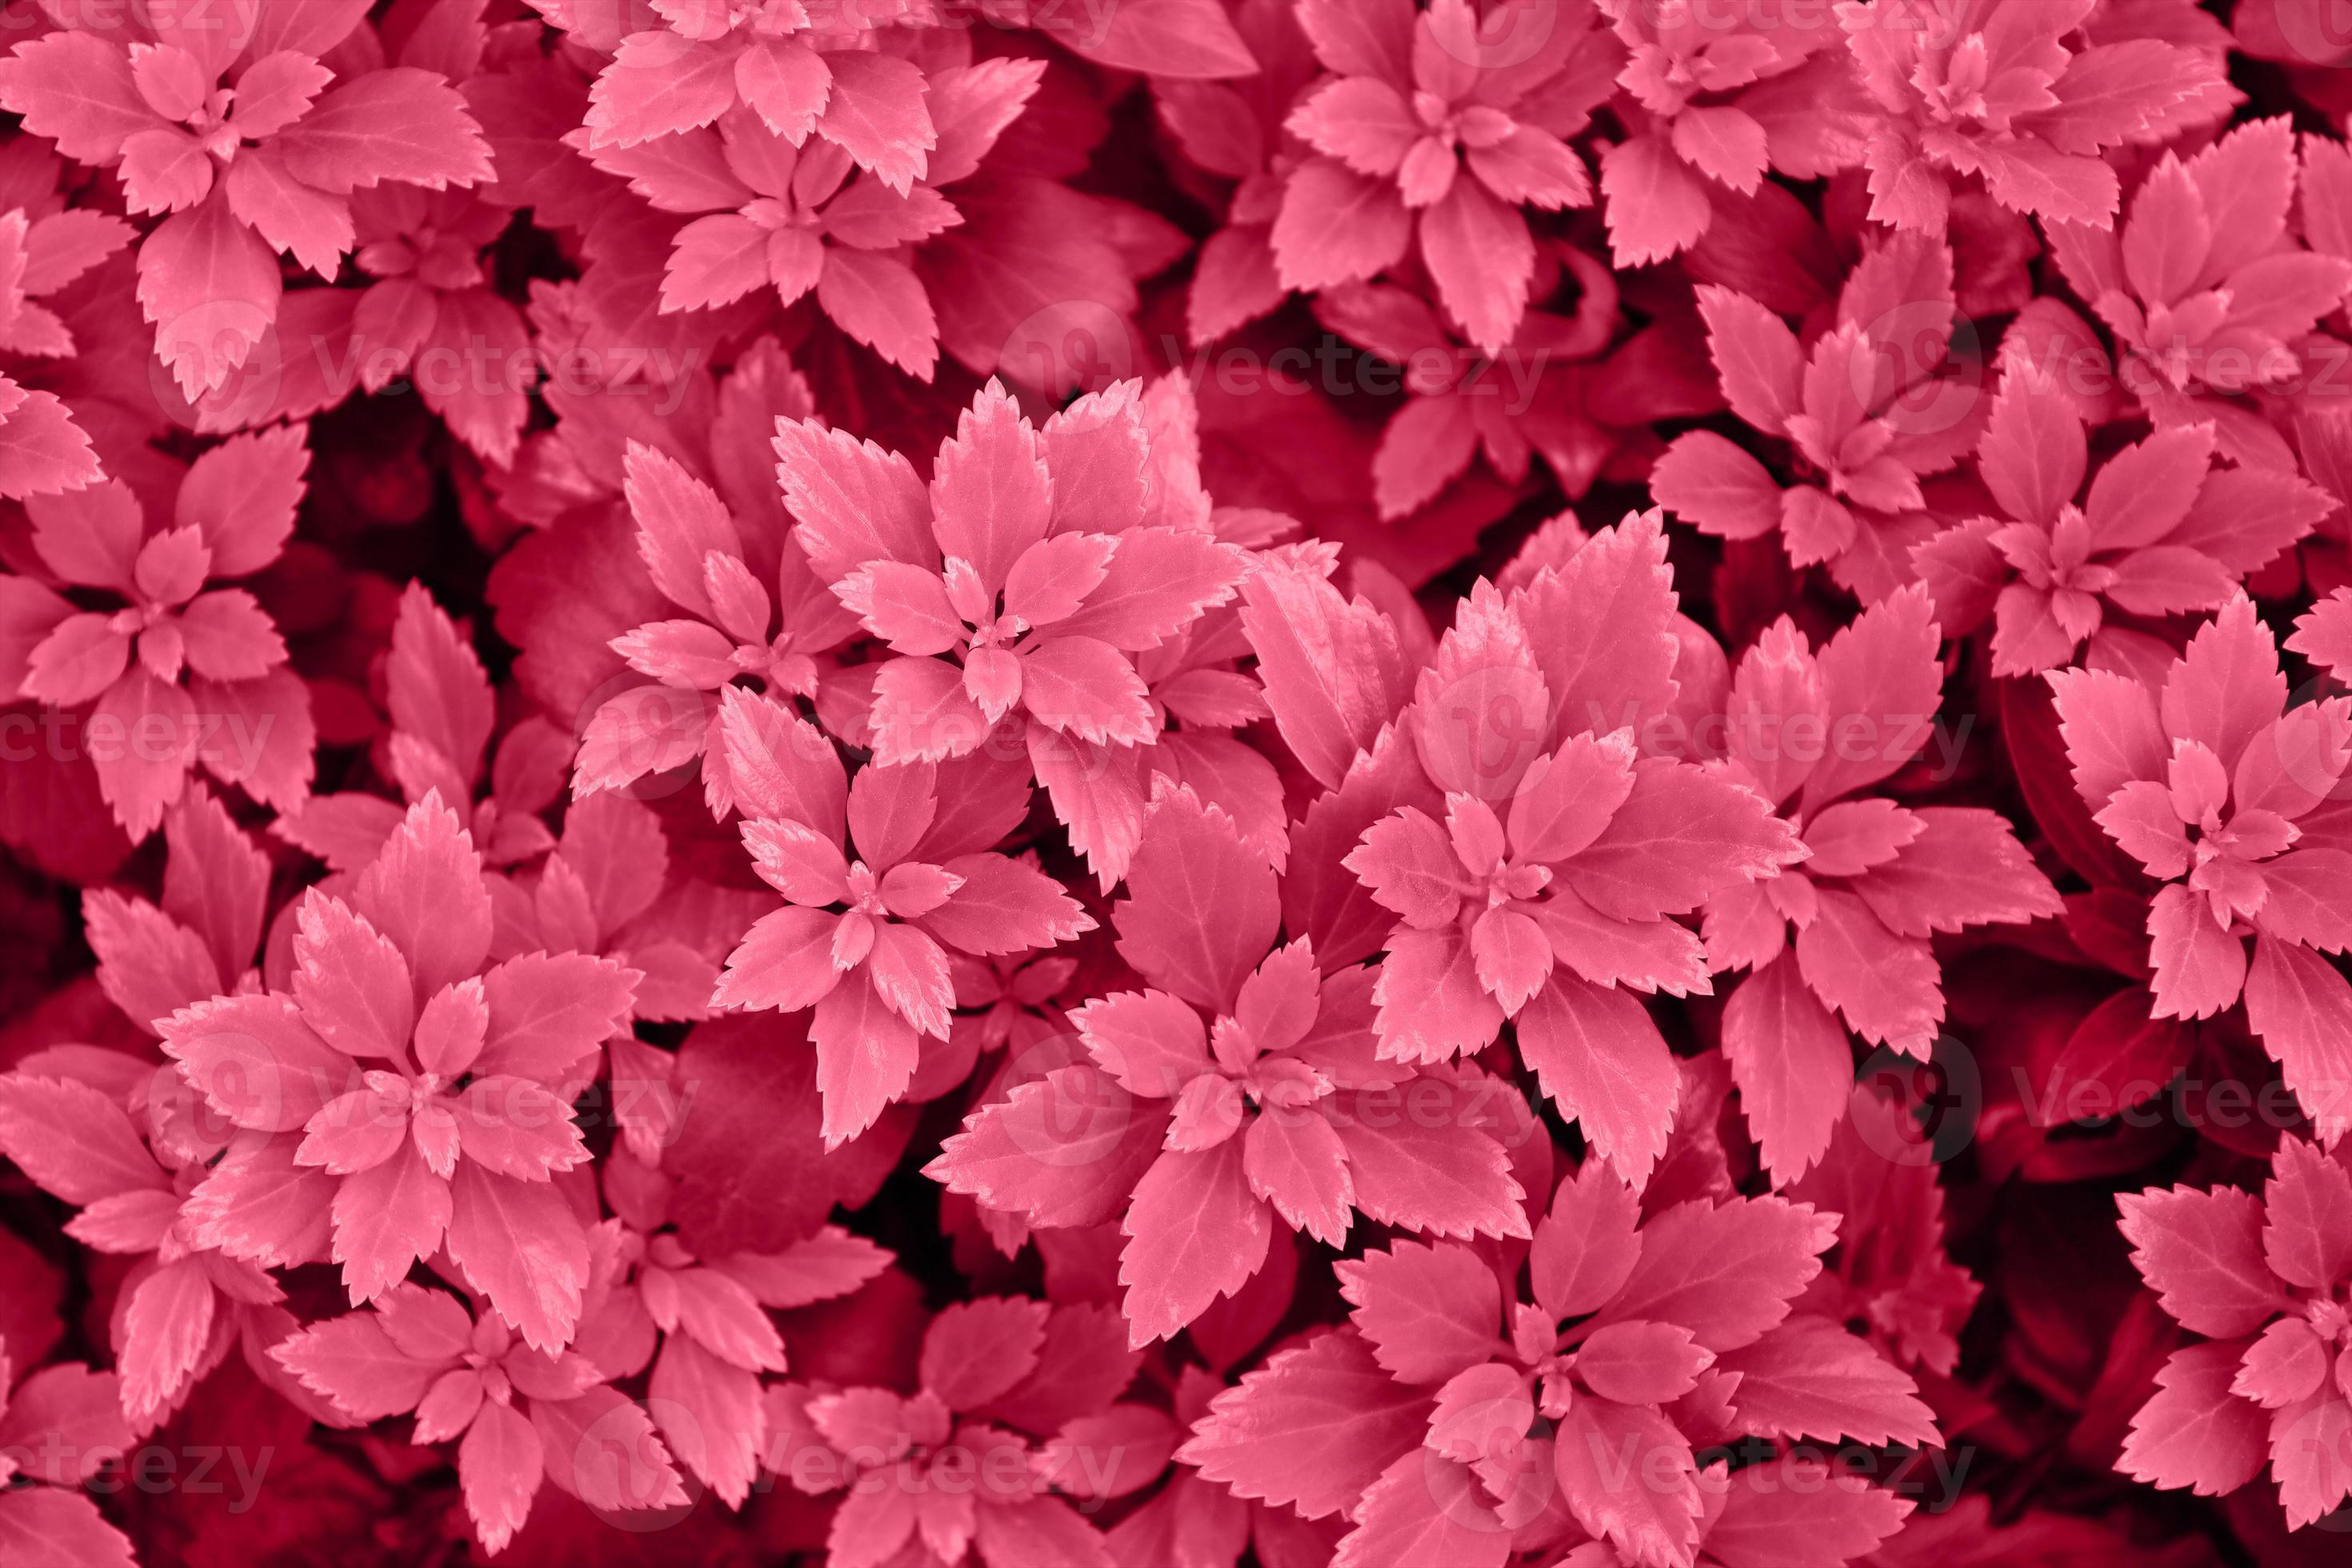 Exploring Viva Magenta Flowers and Pantone's 2023 Color of the